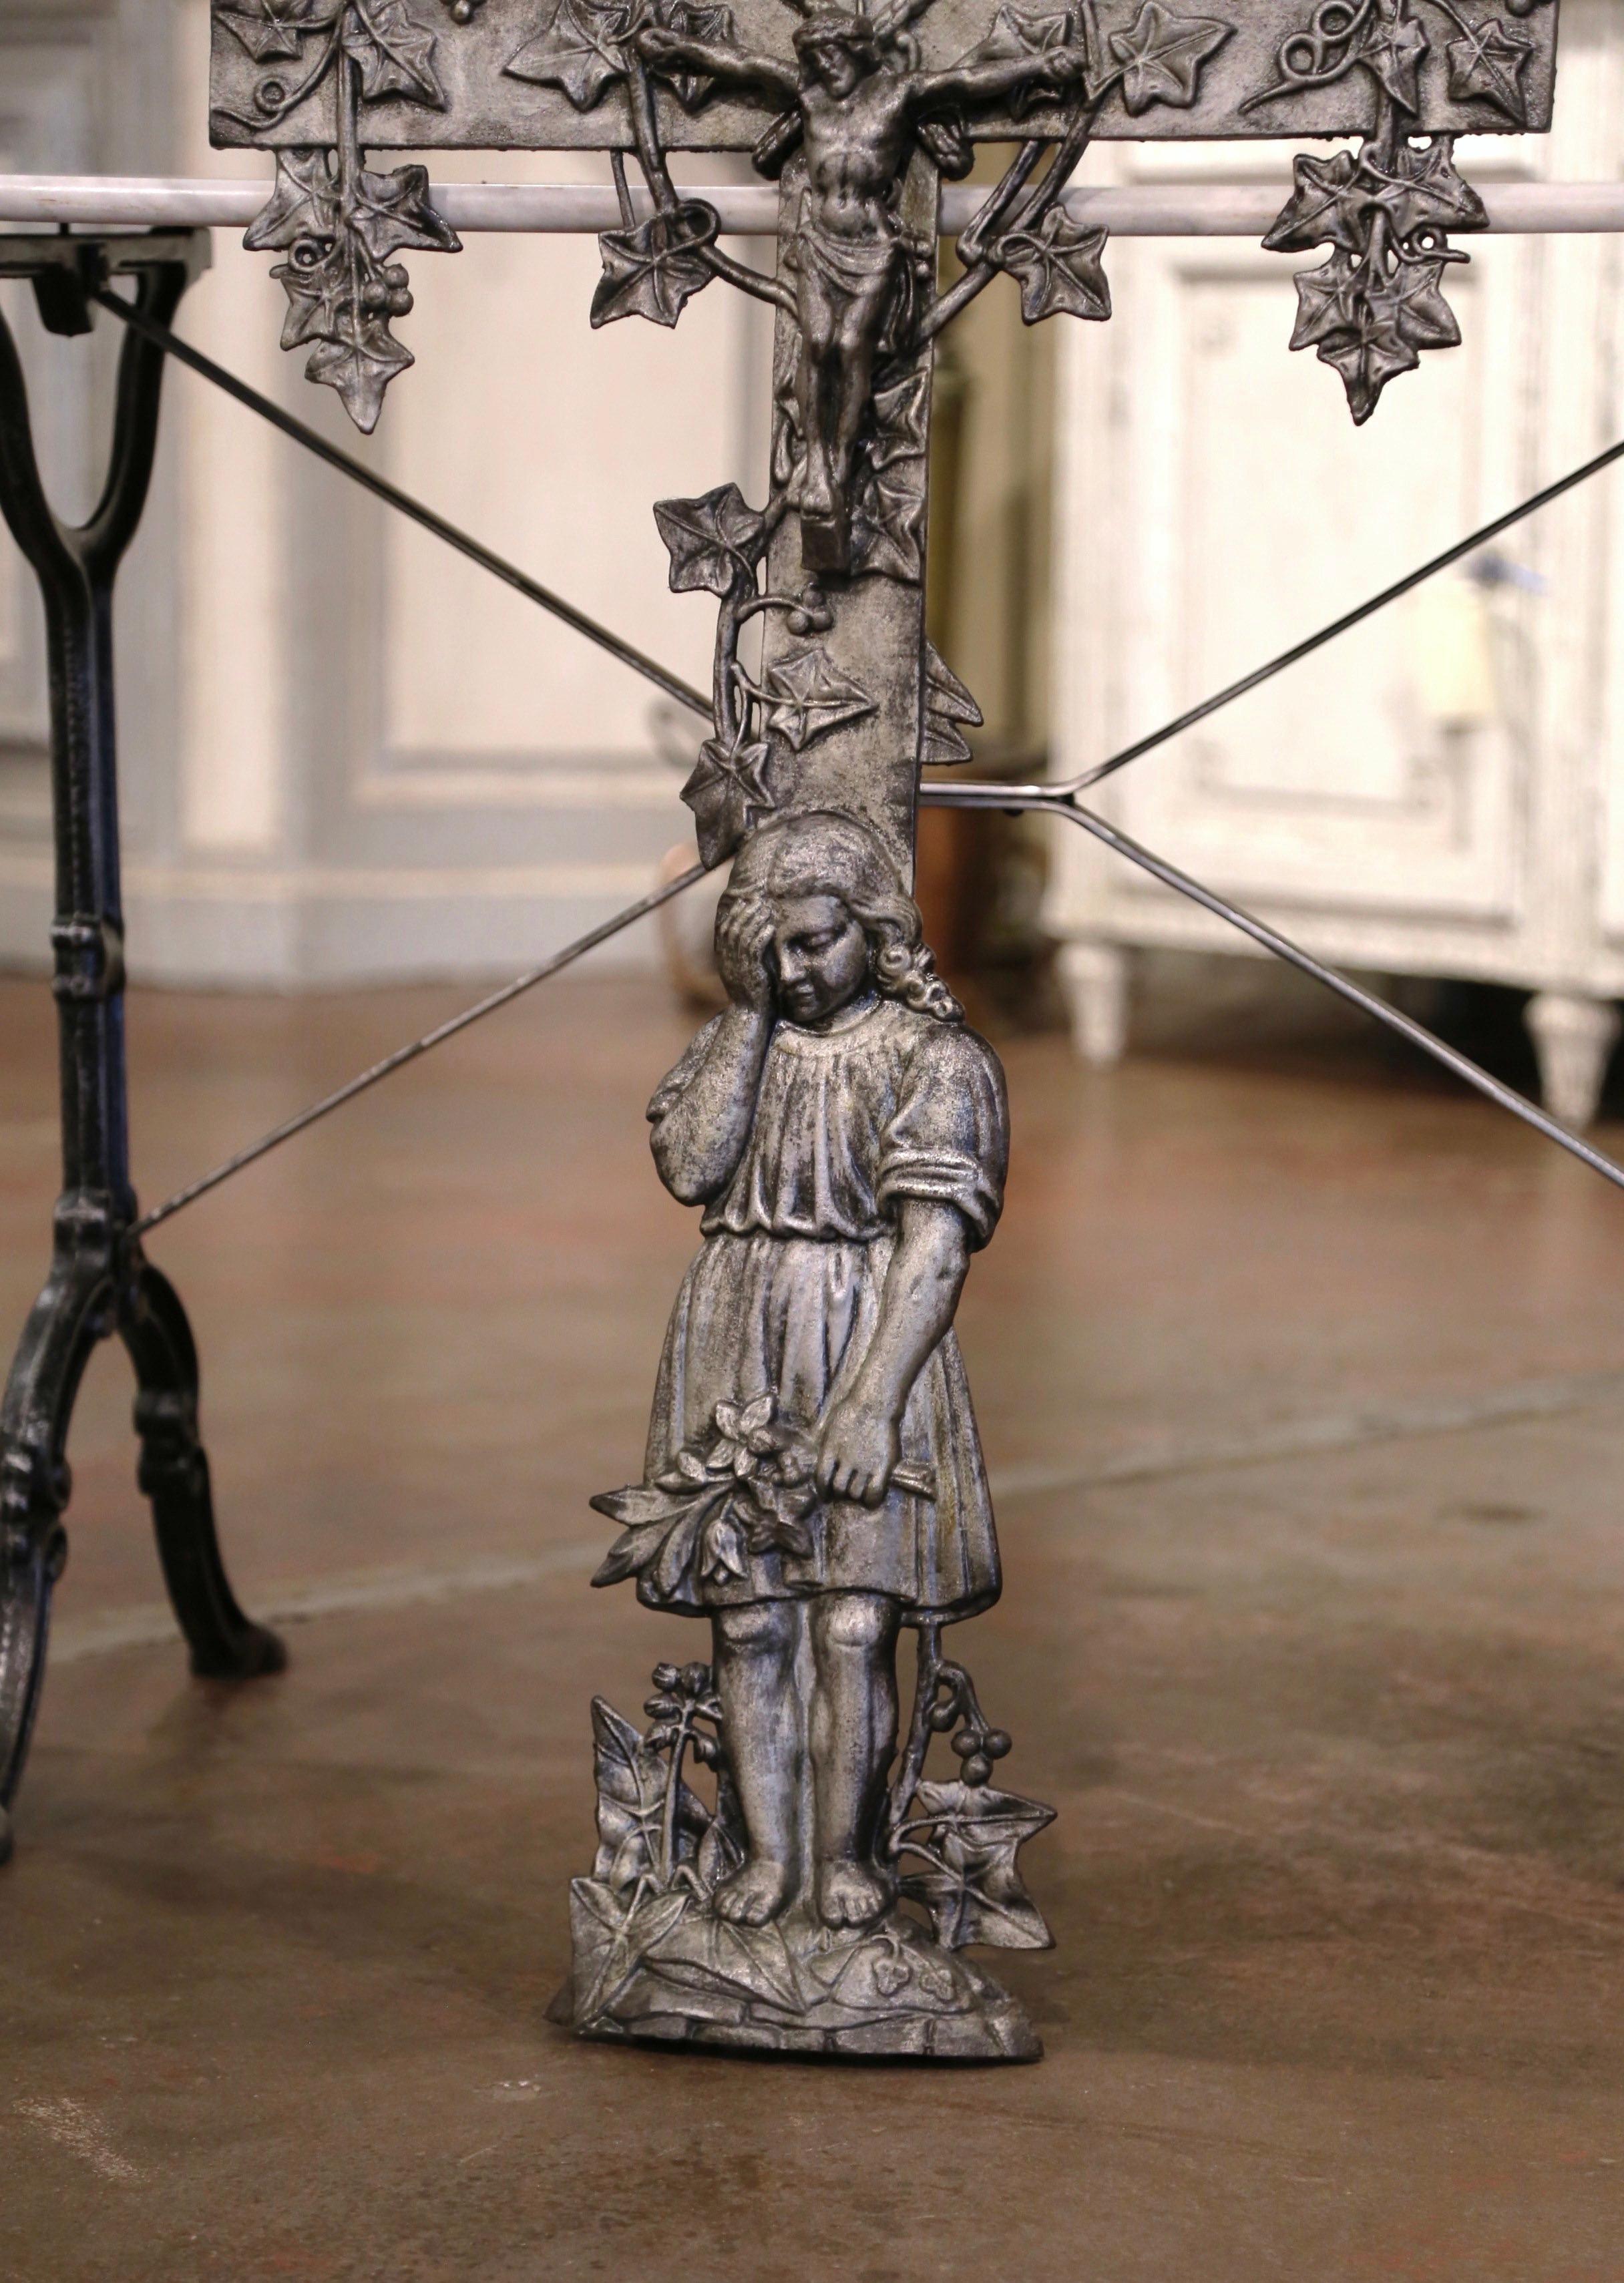 19th Century French Iron Garden Crucifix Cross with Mourner and Vine Motifs 2